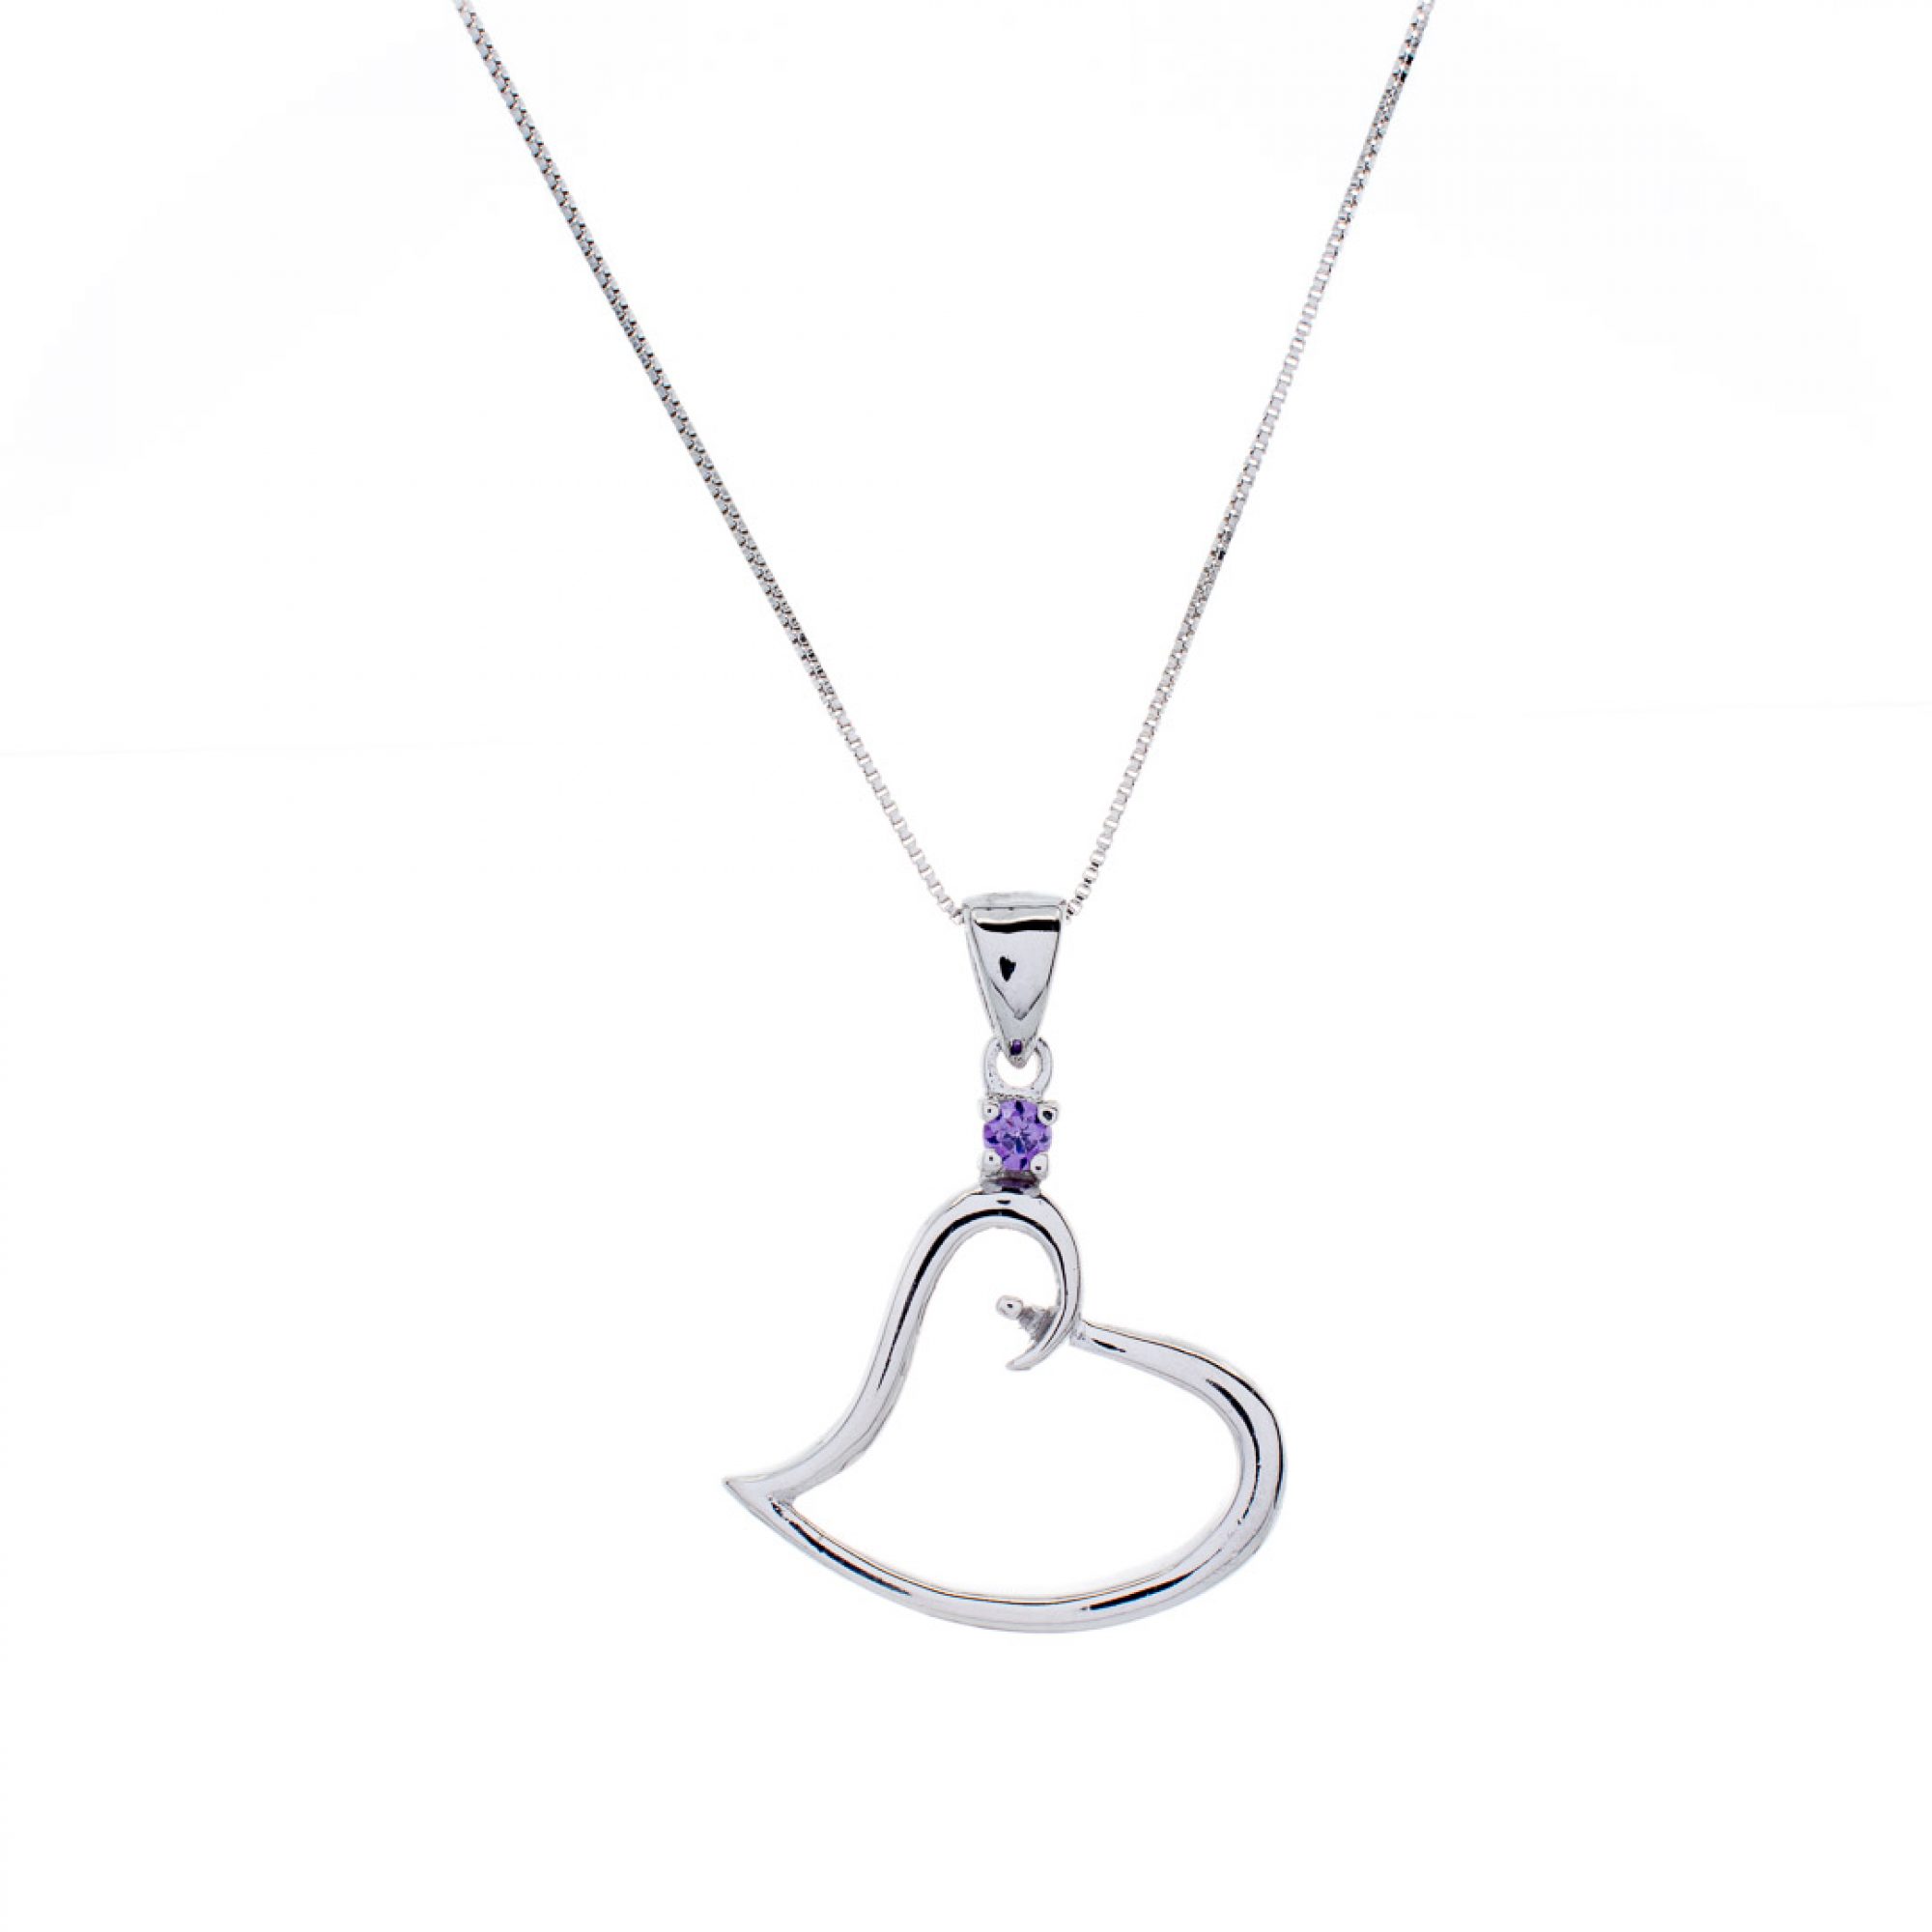 Heart necklace with amethyst stone